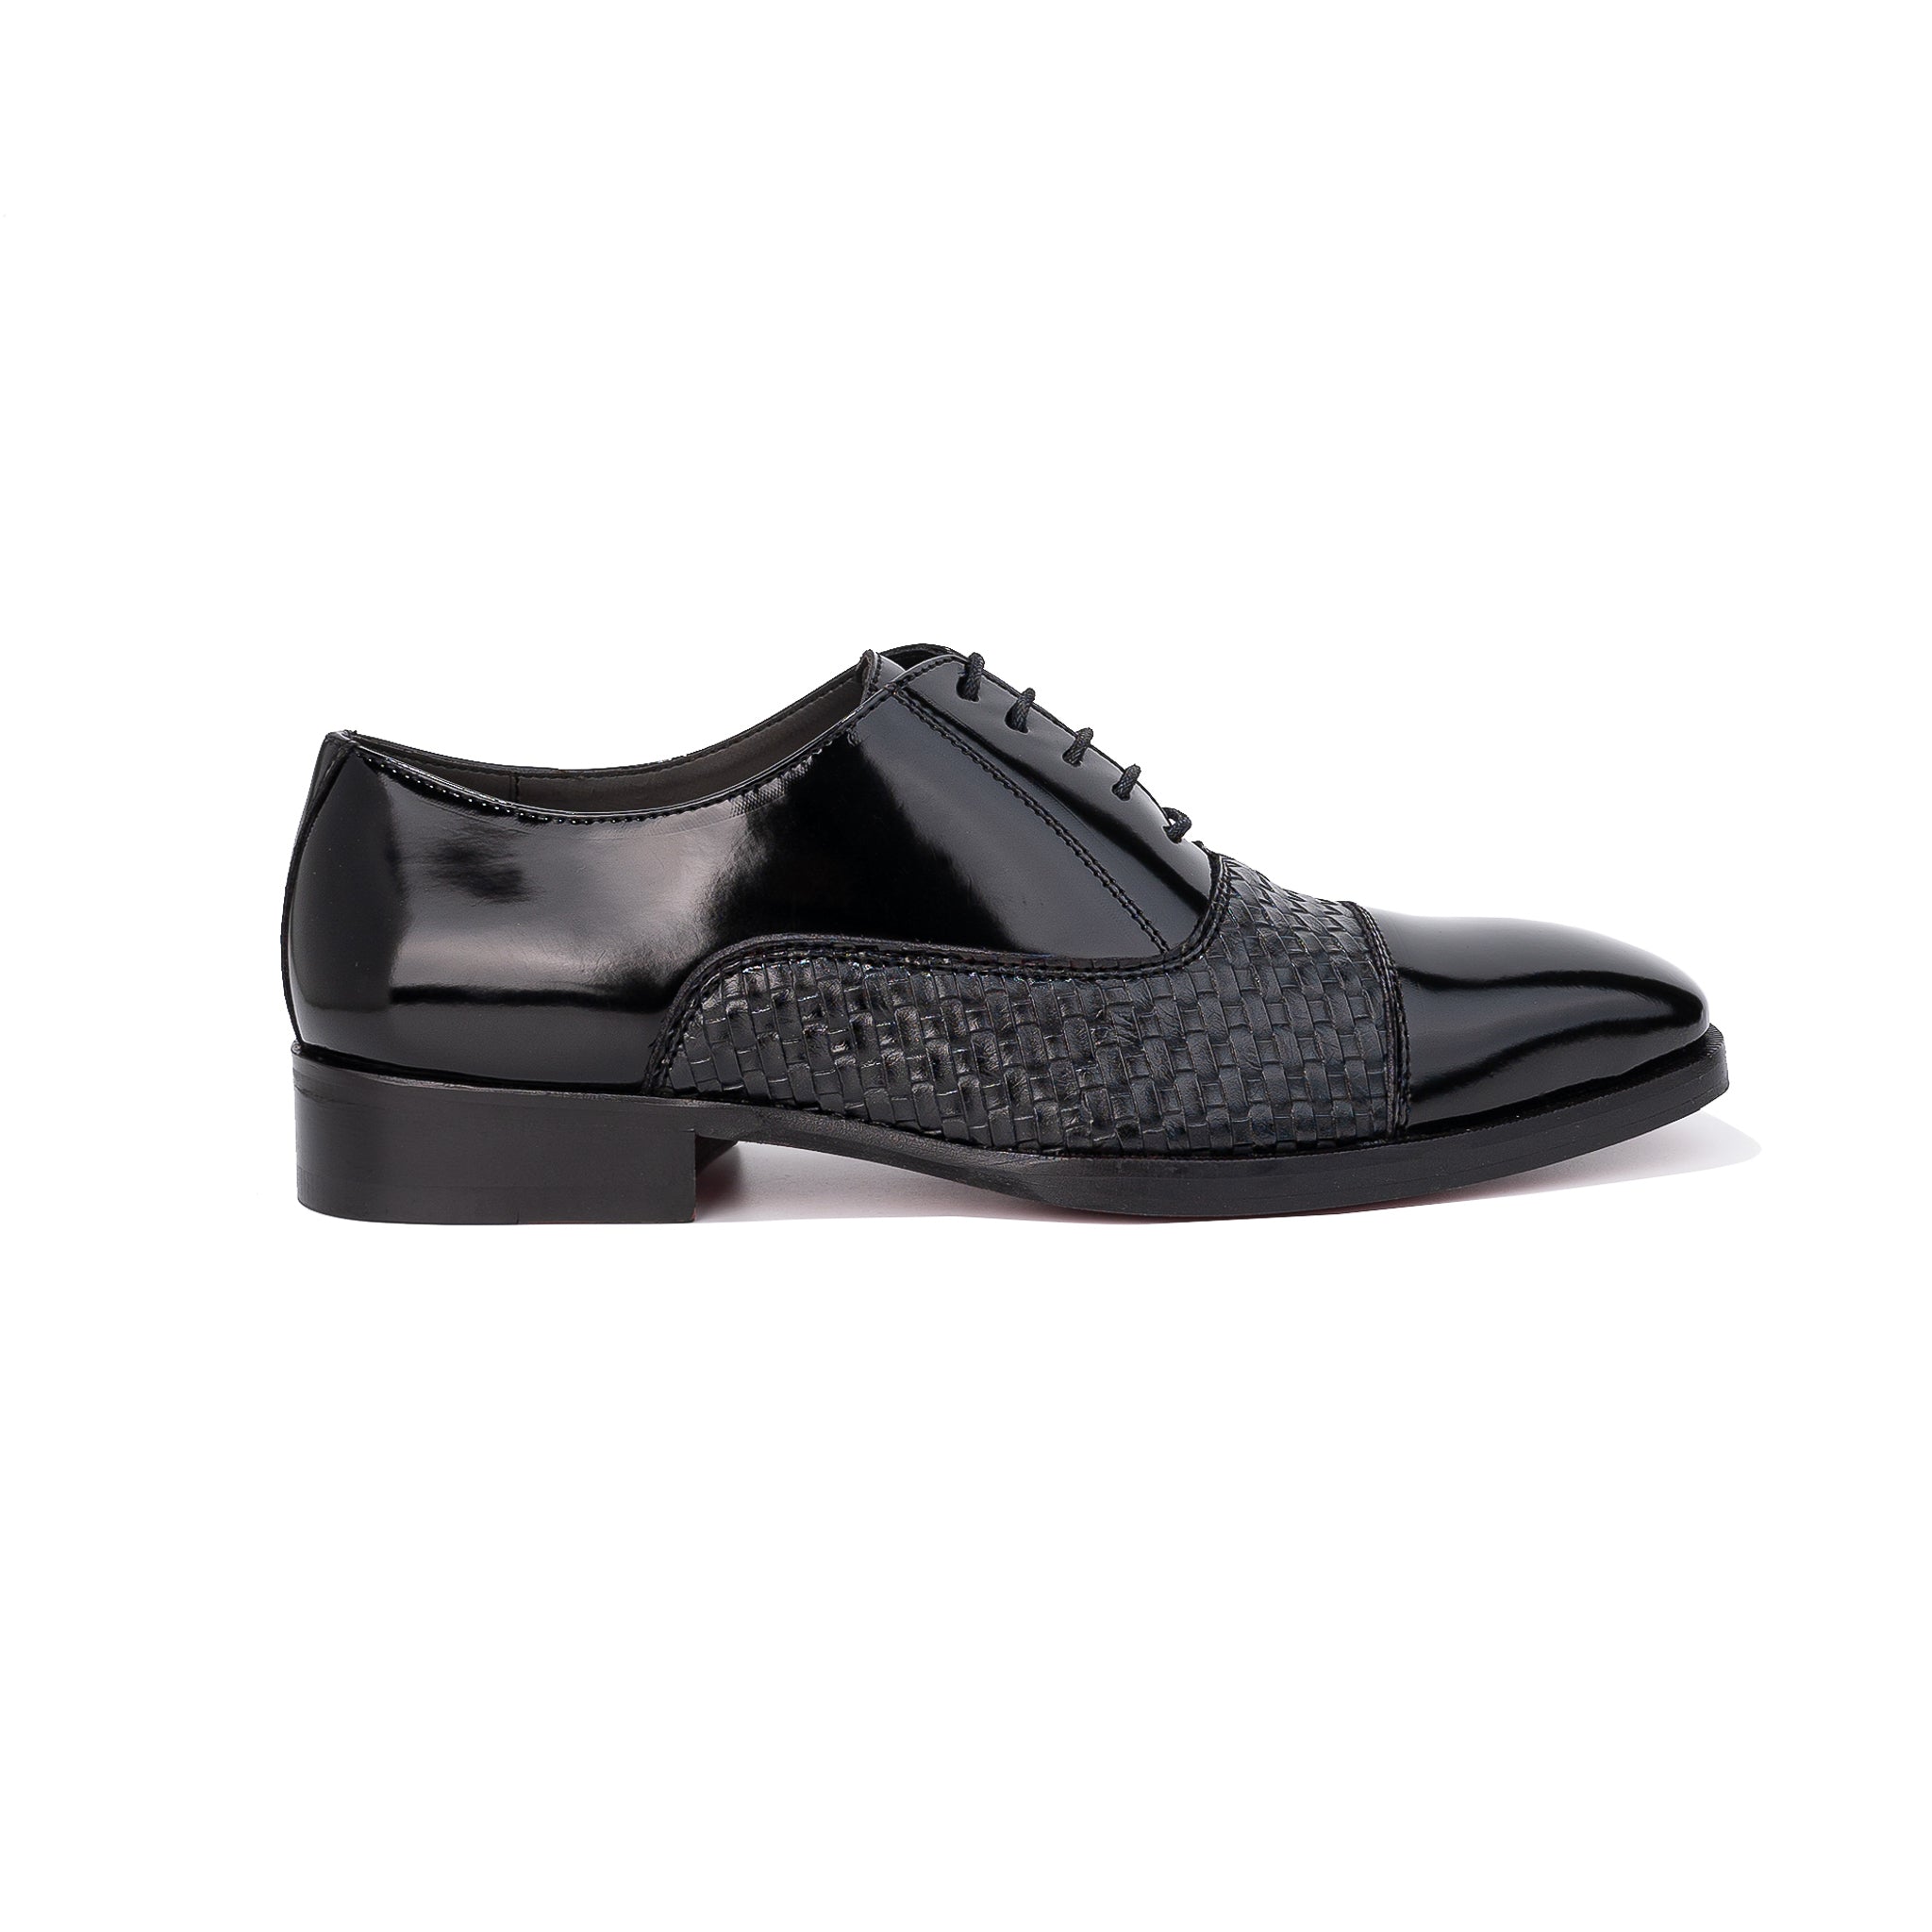 Host Leather Oxford Men's Shoes